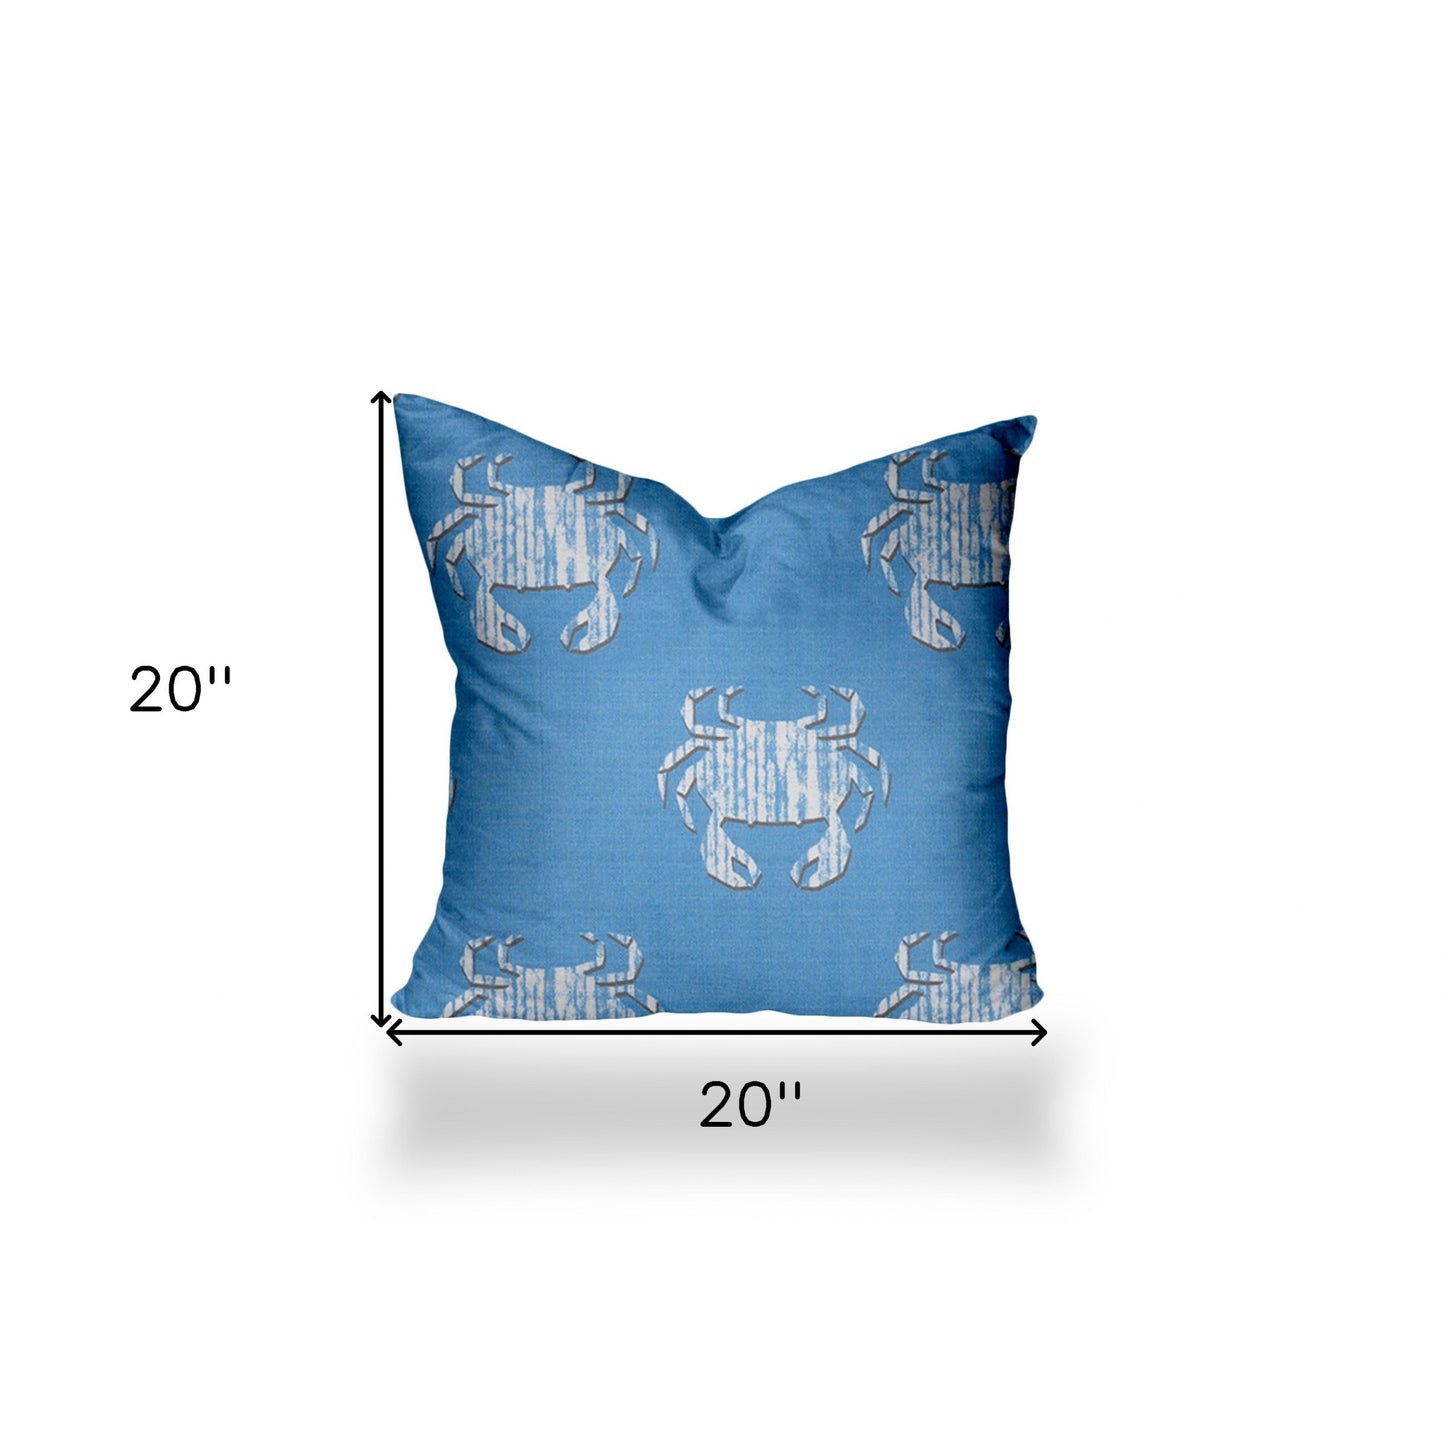 20" X 20" Blue And White Crab Zippered Coastal Throw Indoor Outdoor Pillow